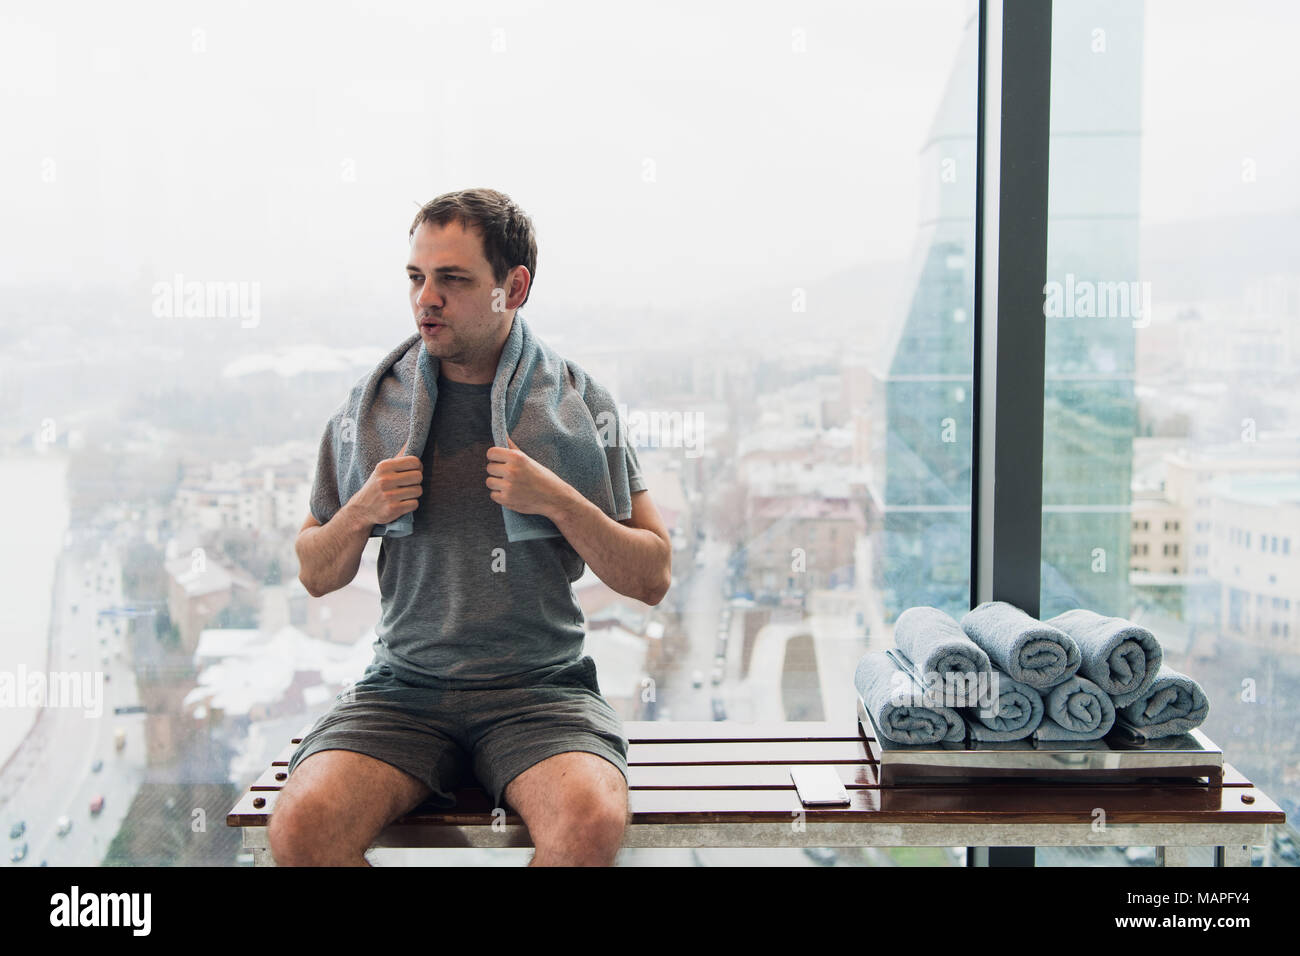 Young man in gym after workout, sitting on a bench in front of wide windows overlooking modern city skyscrapers Stock Photo